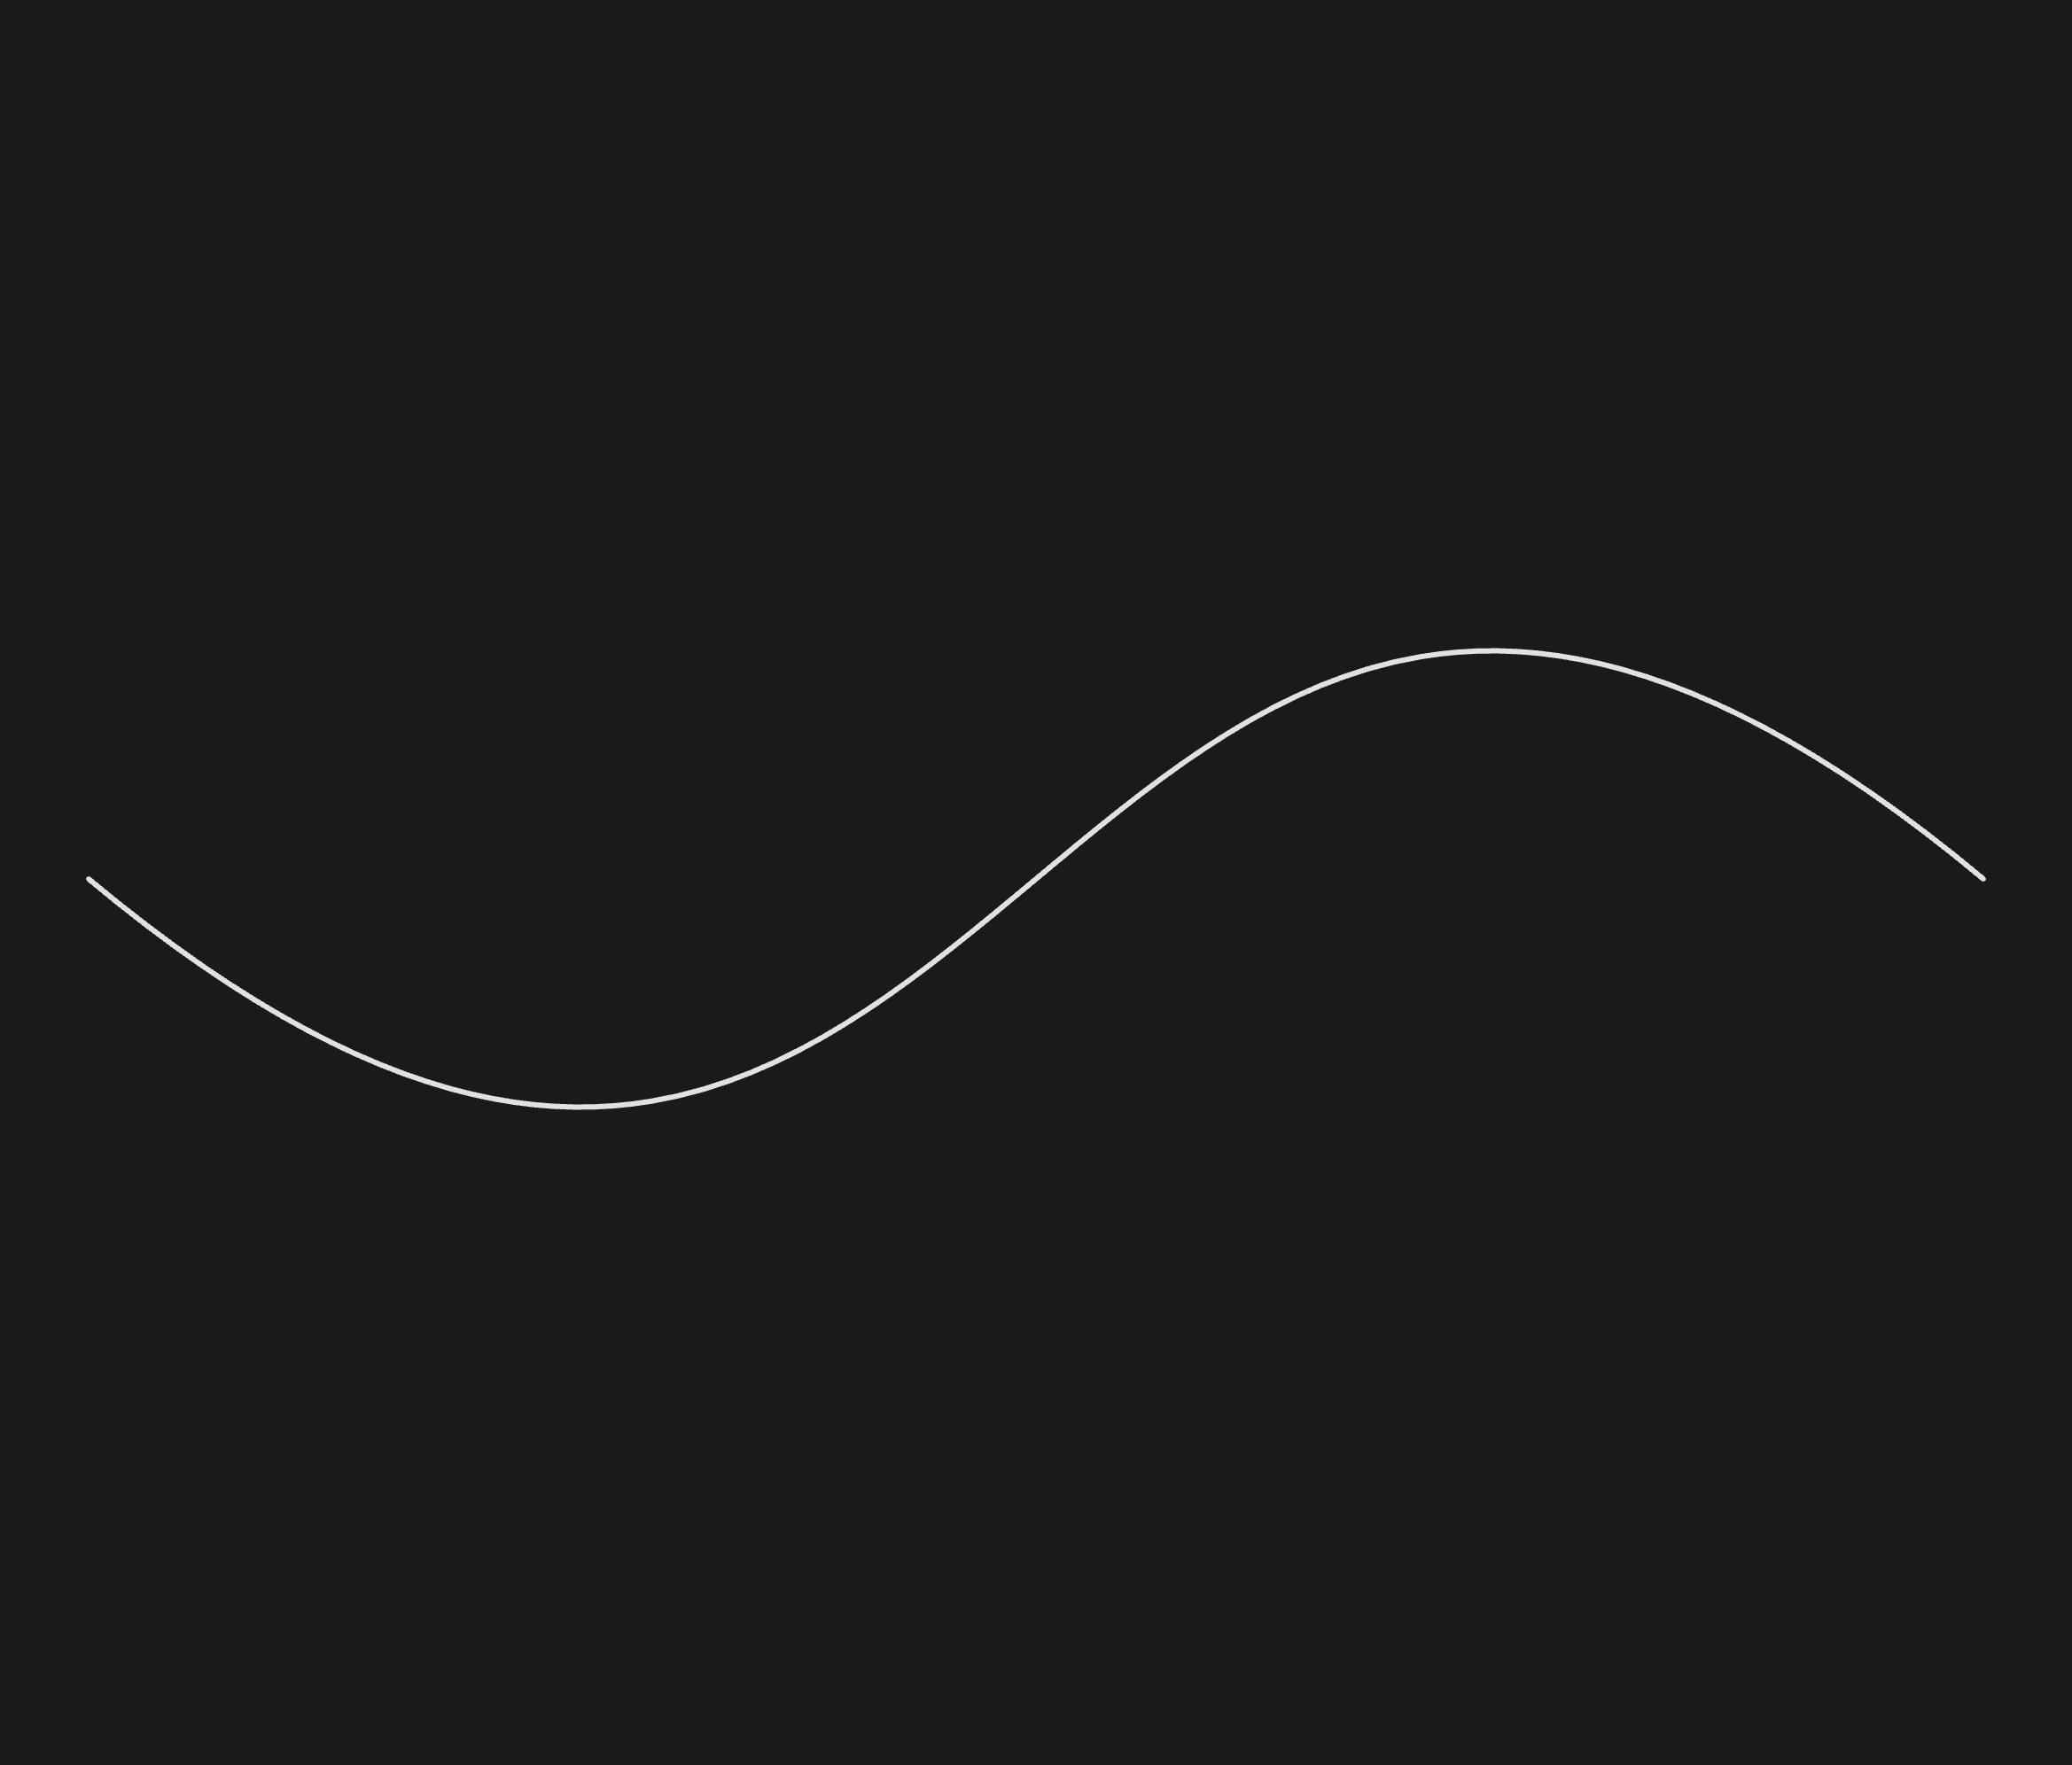 image of a bezier curve with a sine wave like form.